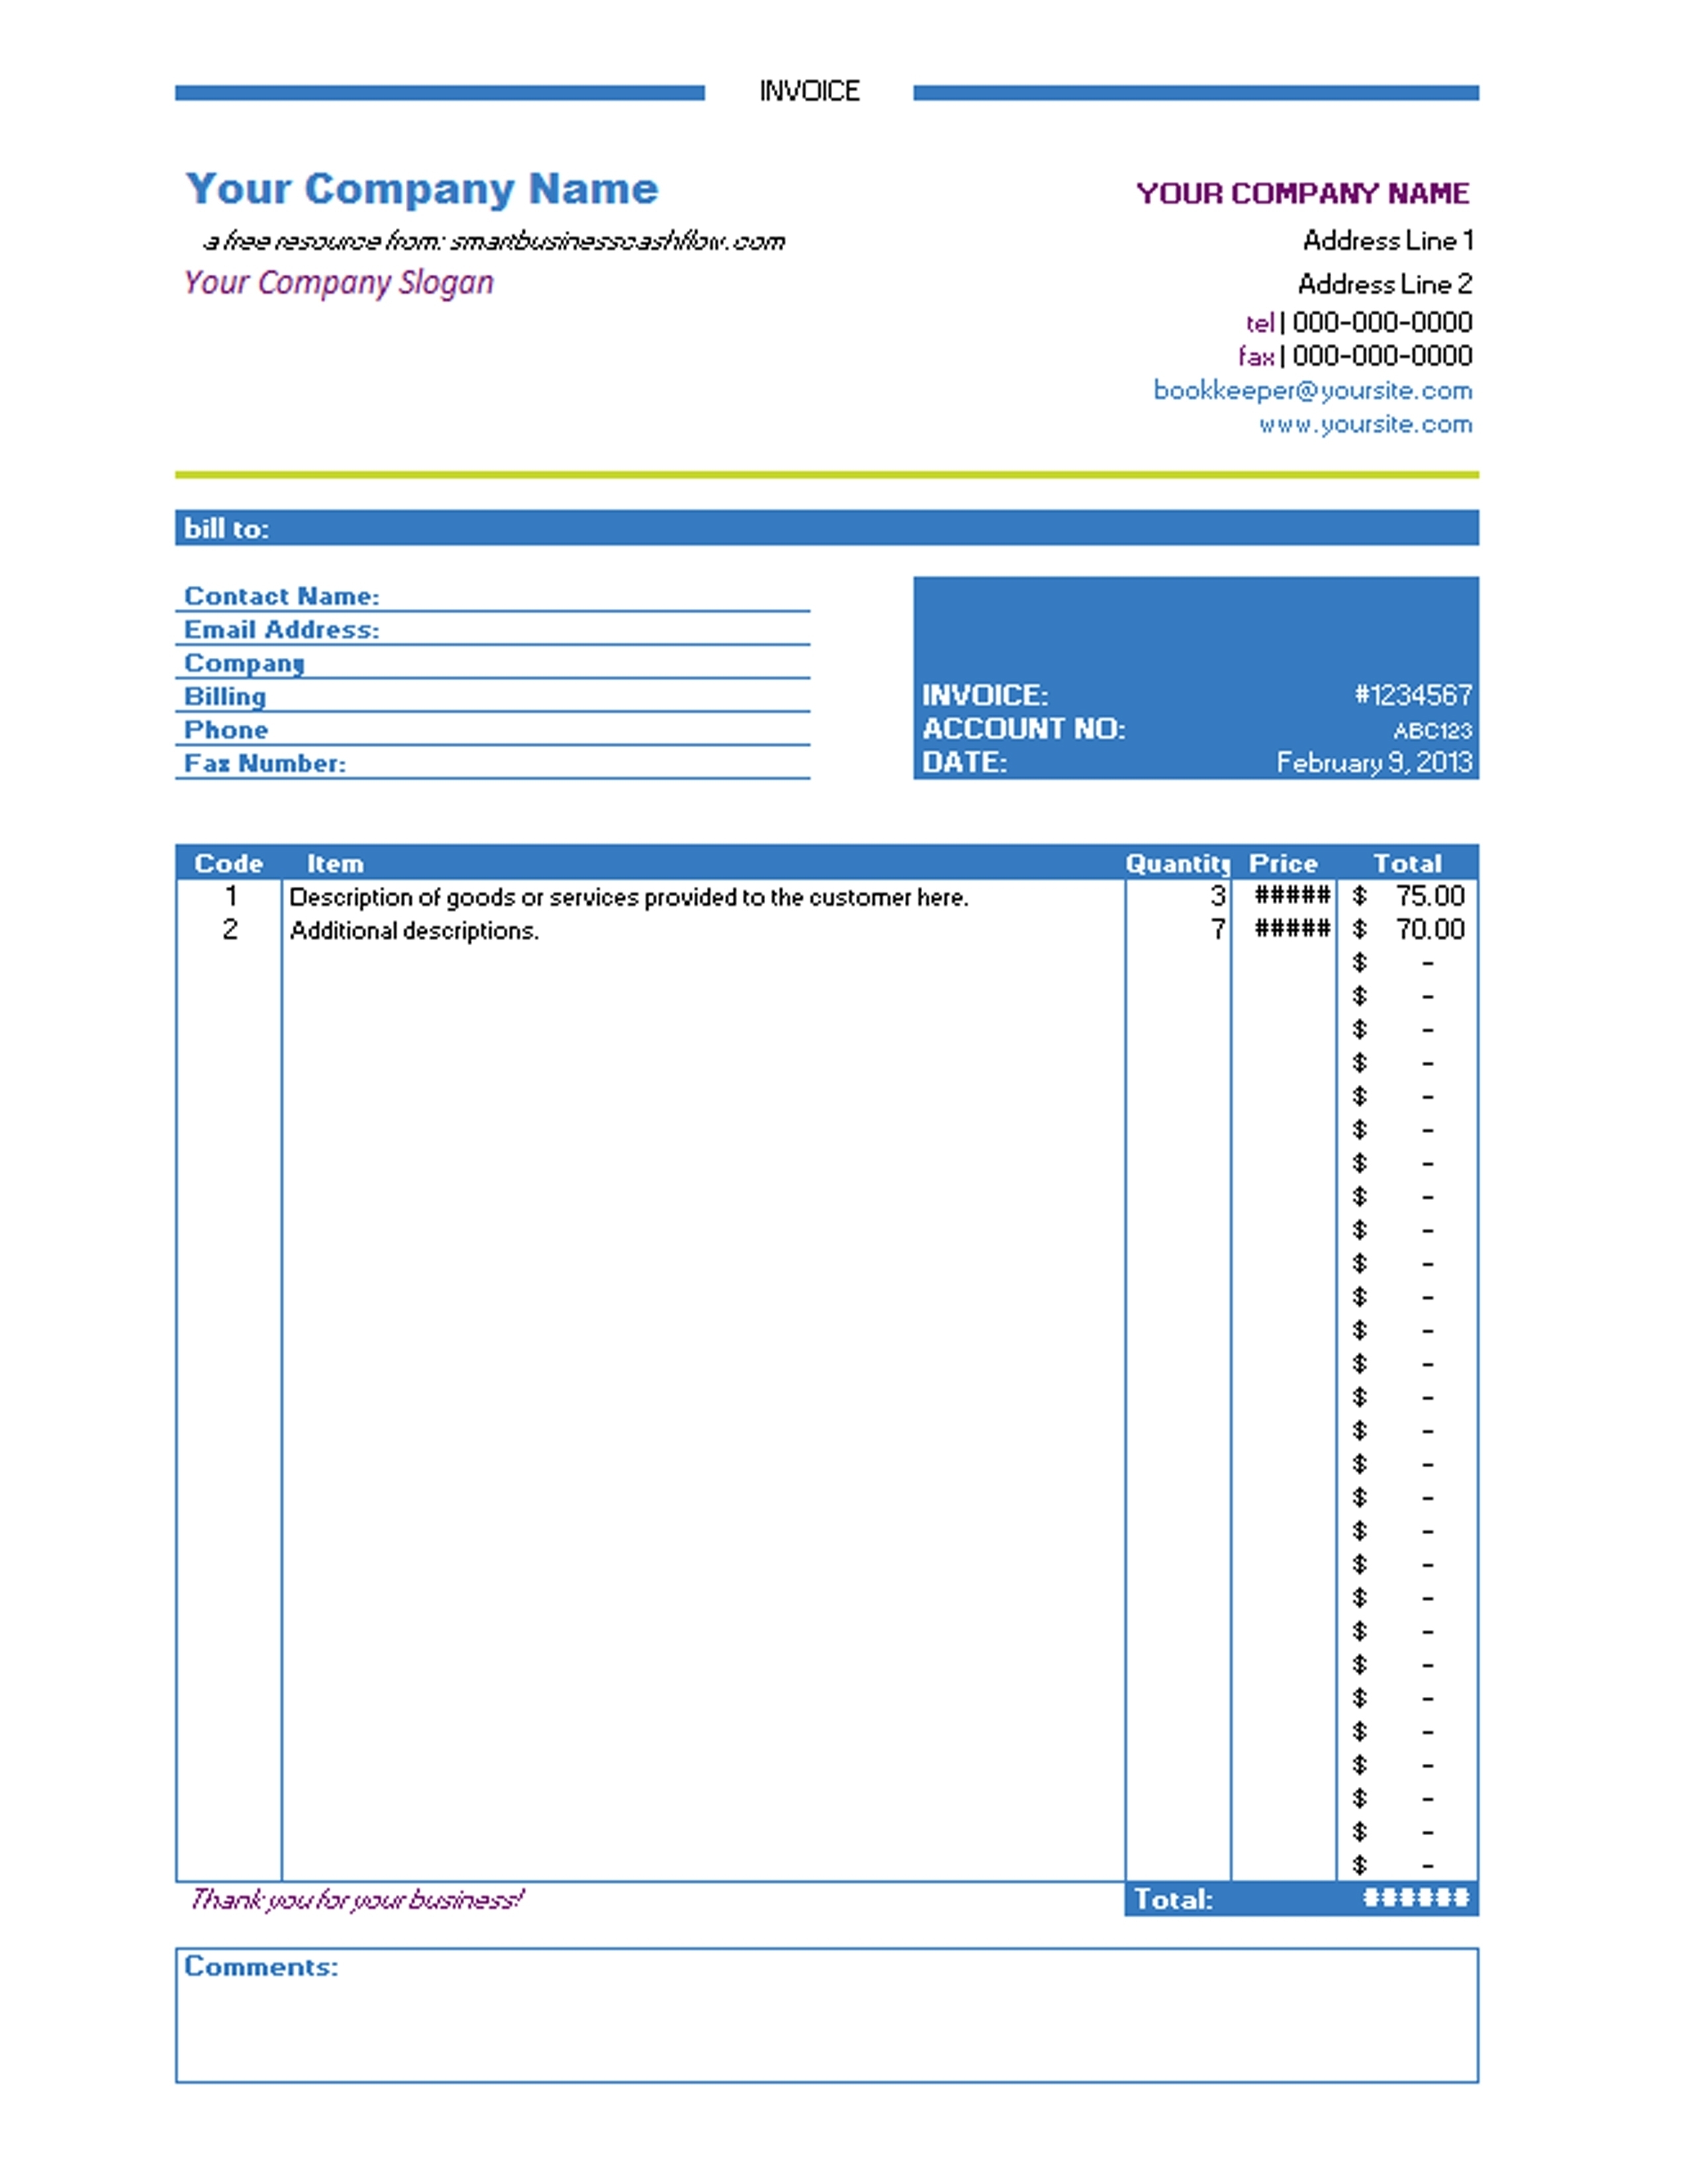 creating an invoice in excel invoice template ideas creating invoice in excel